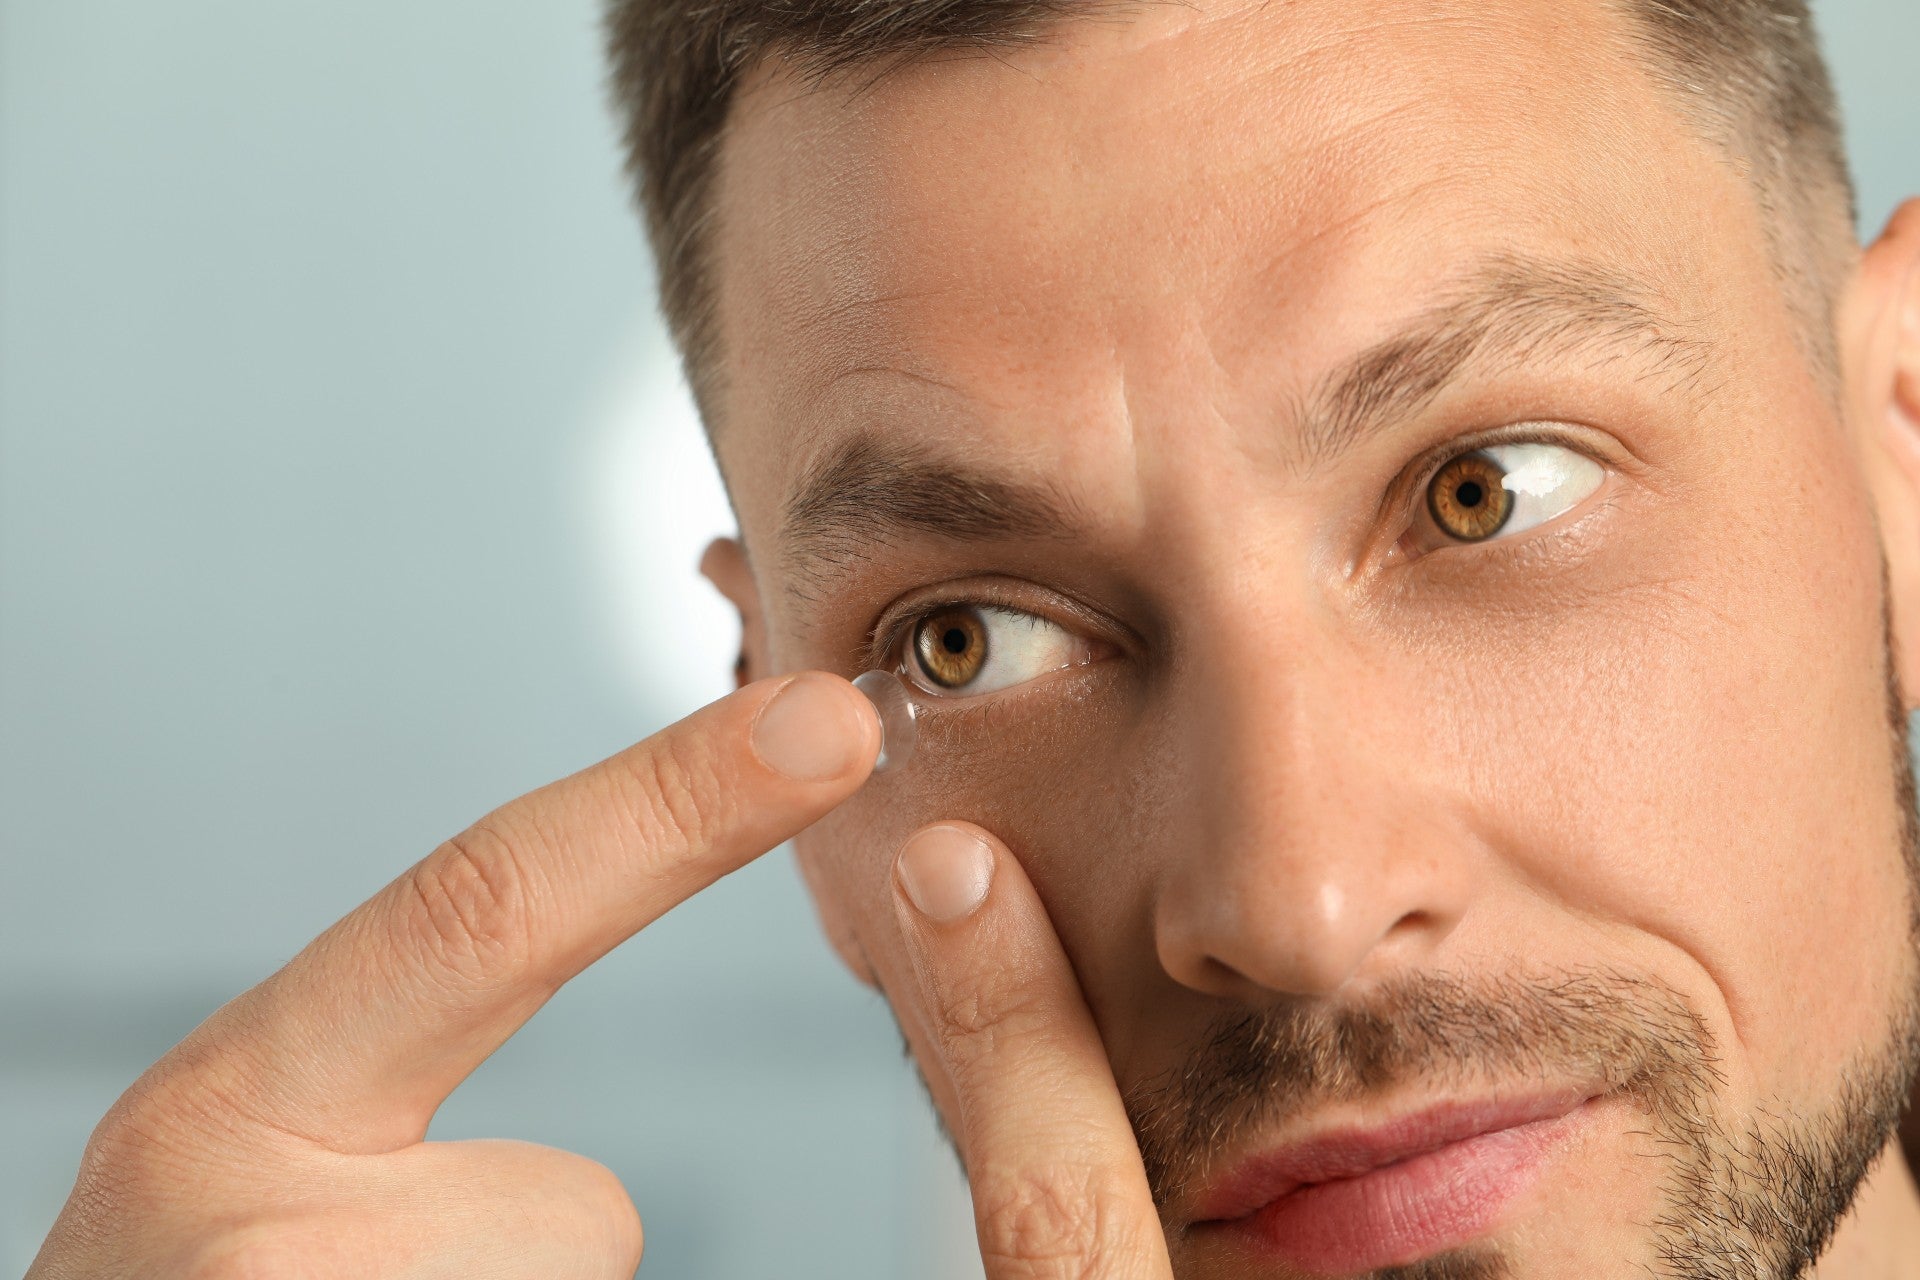 How to Put in Contact Lenses: The Complete Guide